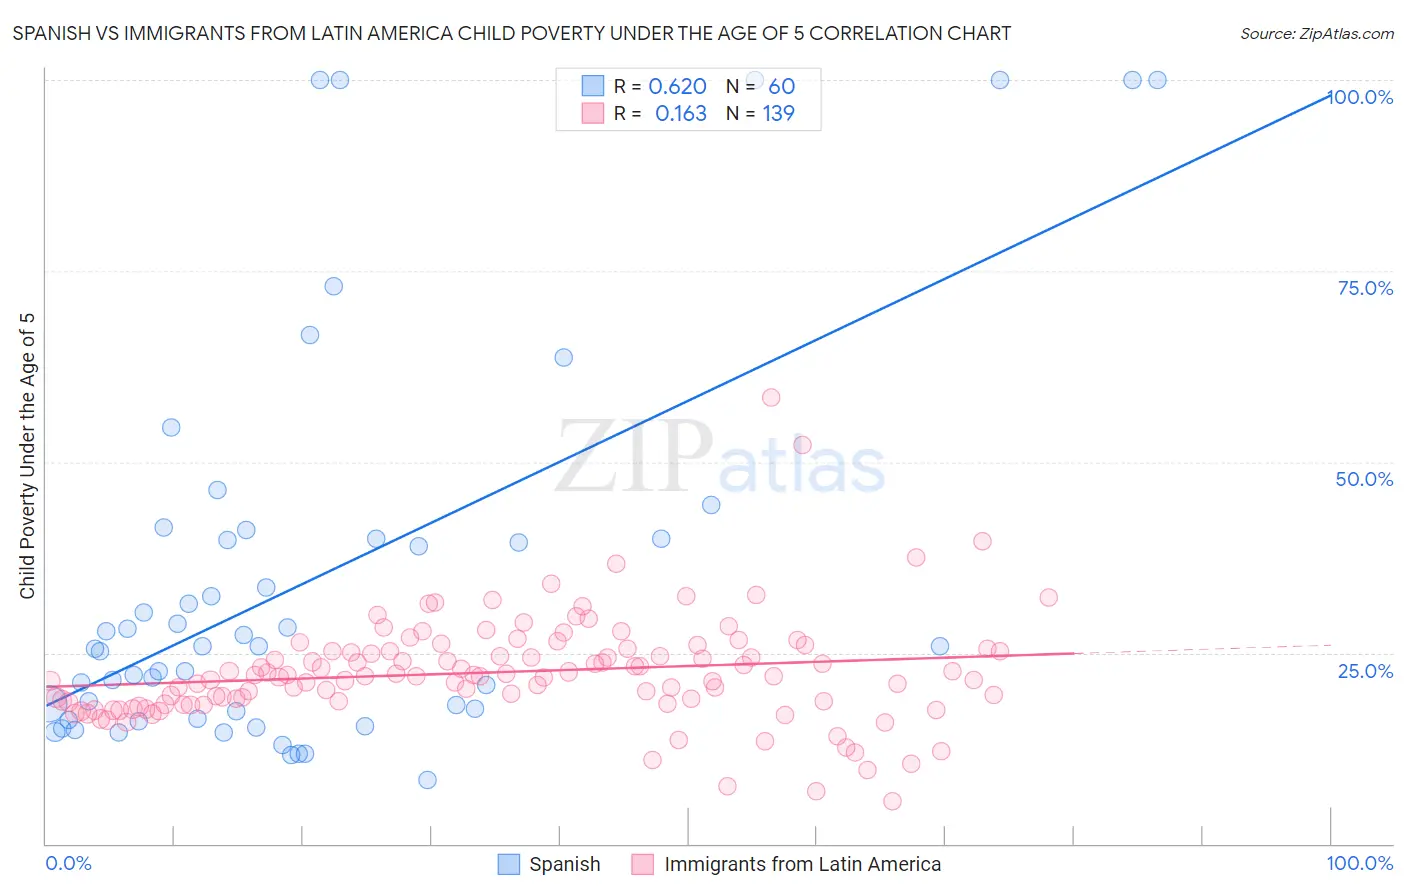 Spanish vs Immigrants from Latin America Child Poverty Under the Age of 5